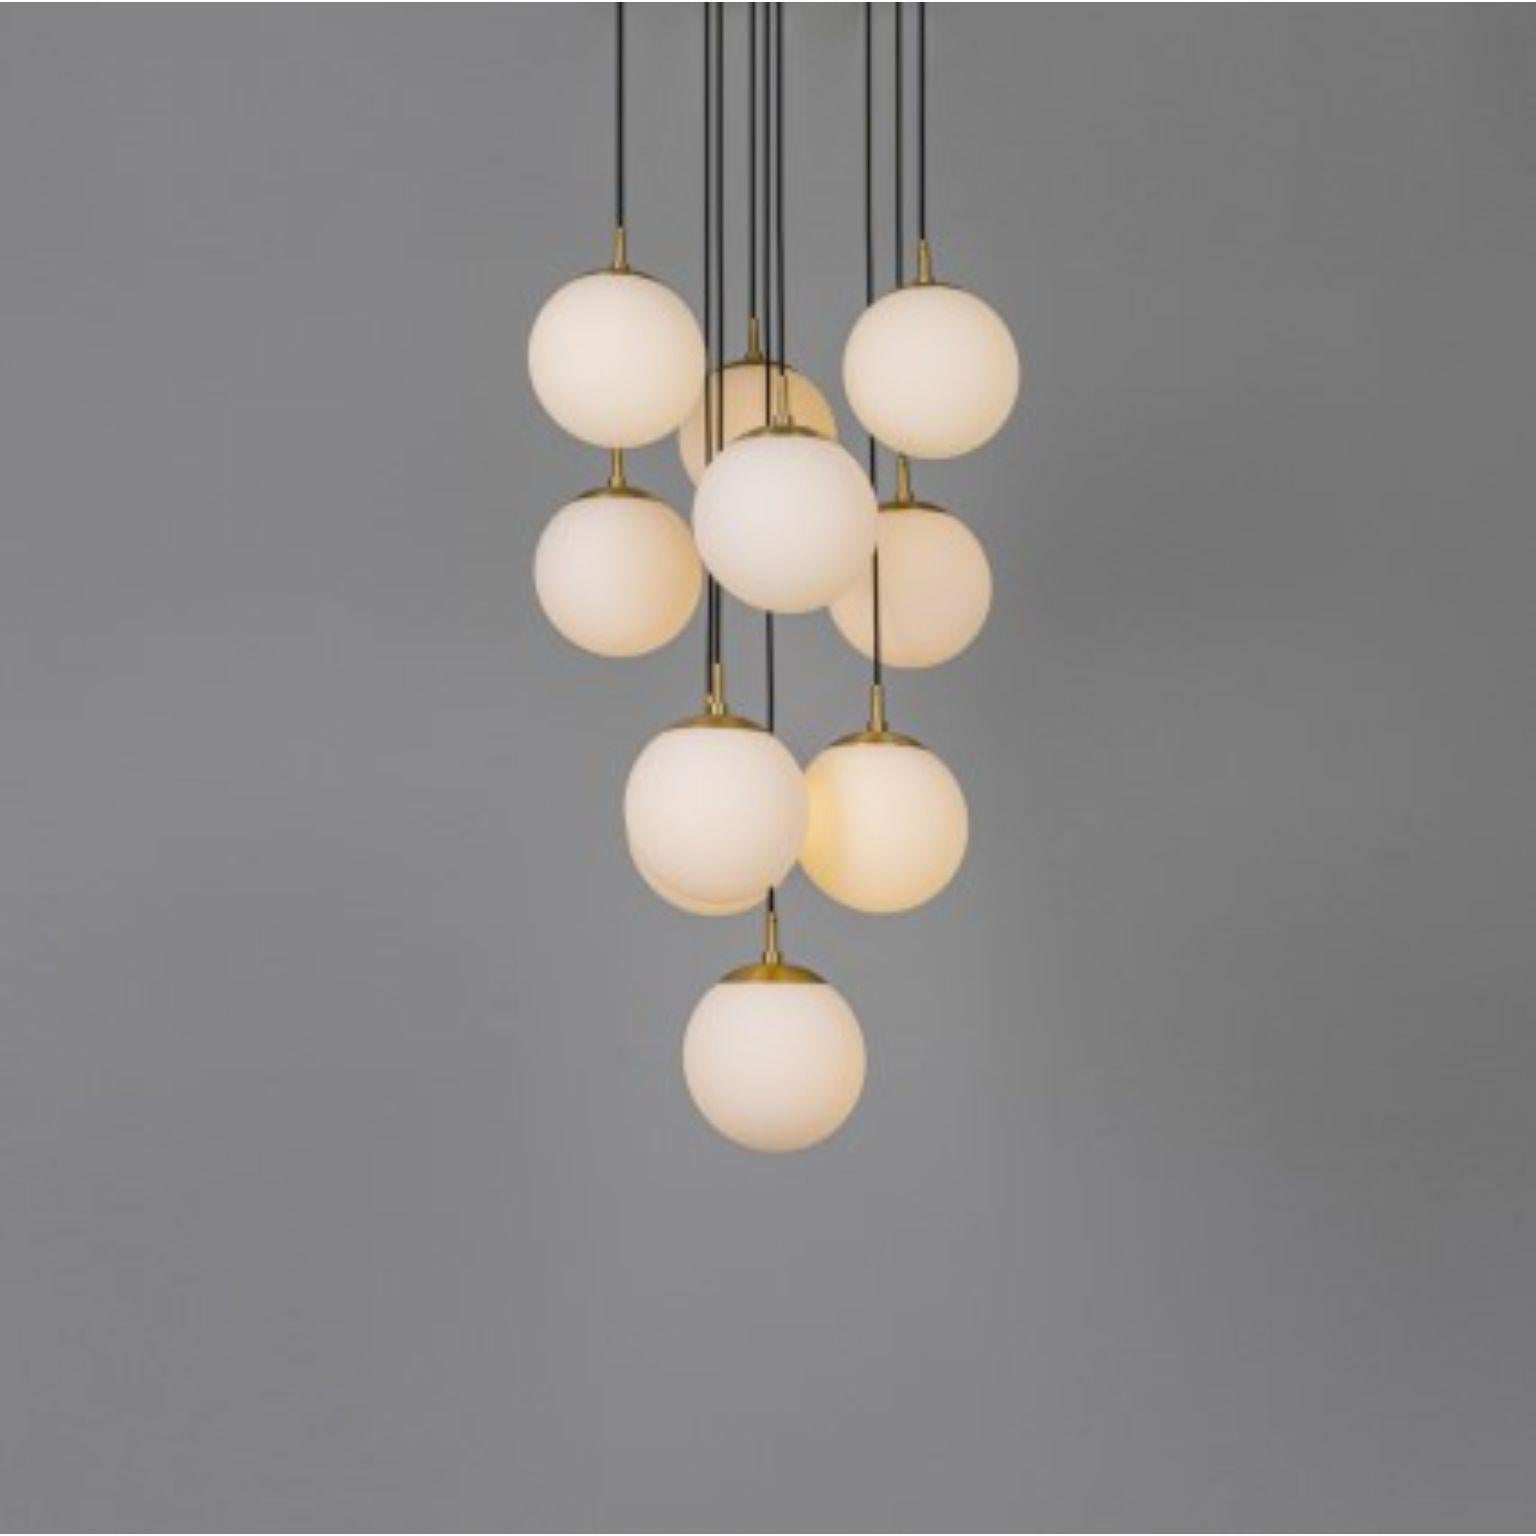 Globe cluster 10 chandelier by Schwung
Dimensions: D 60 x H 155.4 cm
Materials: Brass, opal glass
Weight: 20.2 kg

Finishes available: Black gunmetal, polished nickel, brass
Other sizes available.

 Schwung is a german word, and loosely